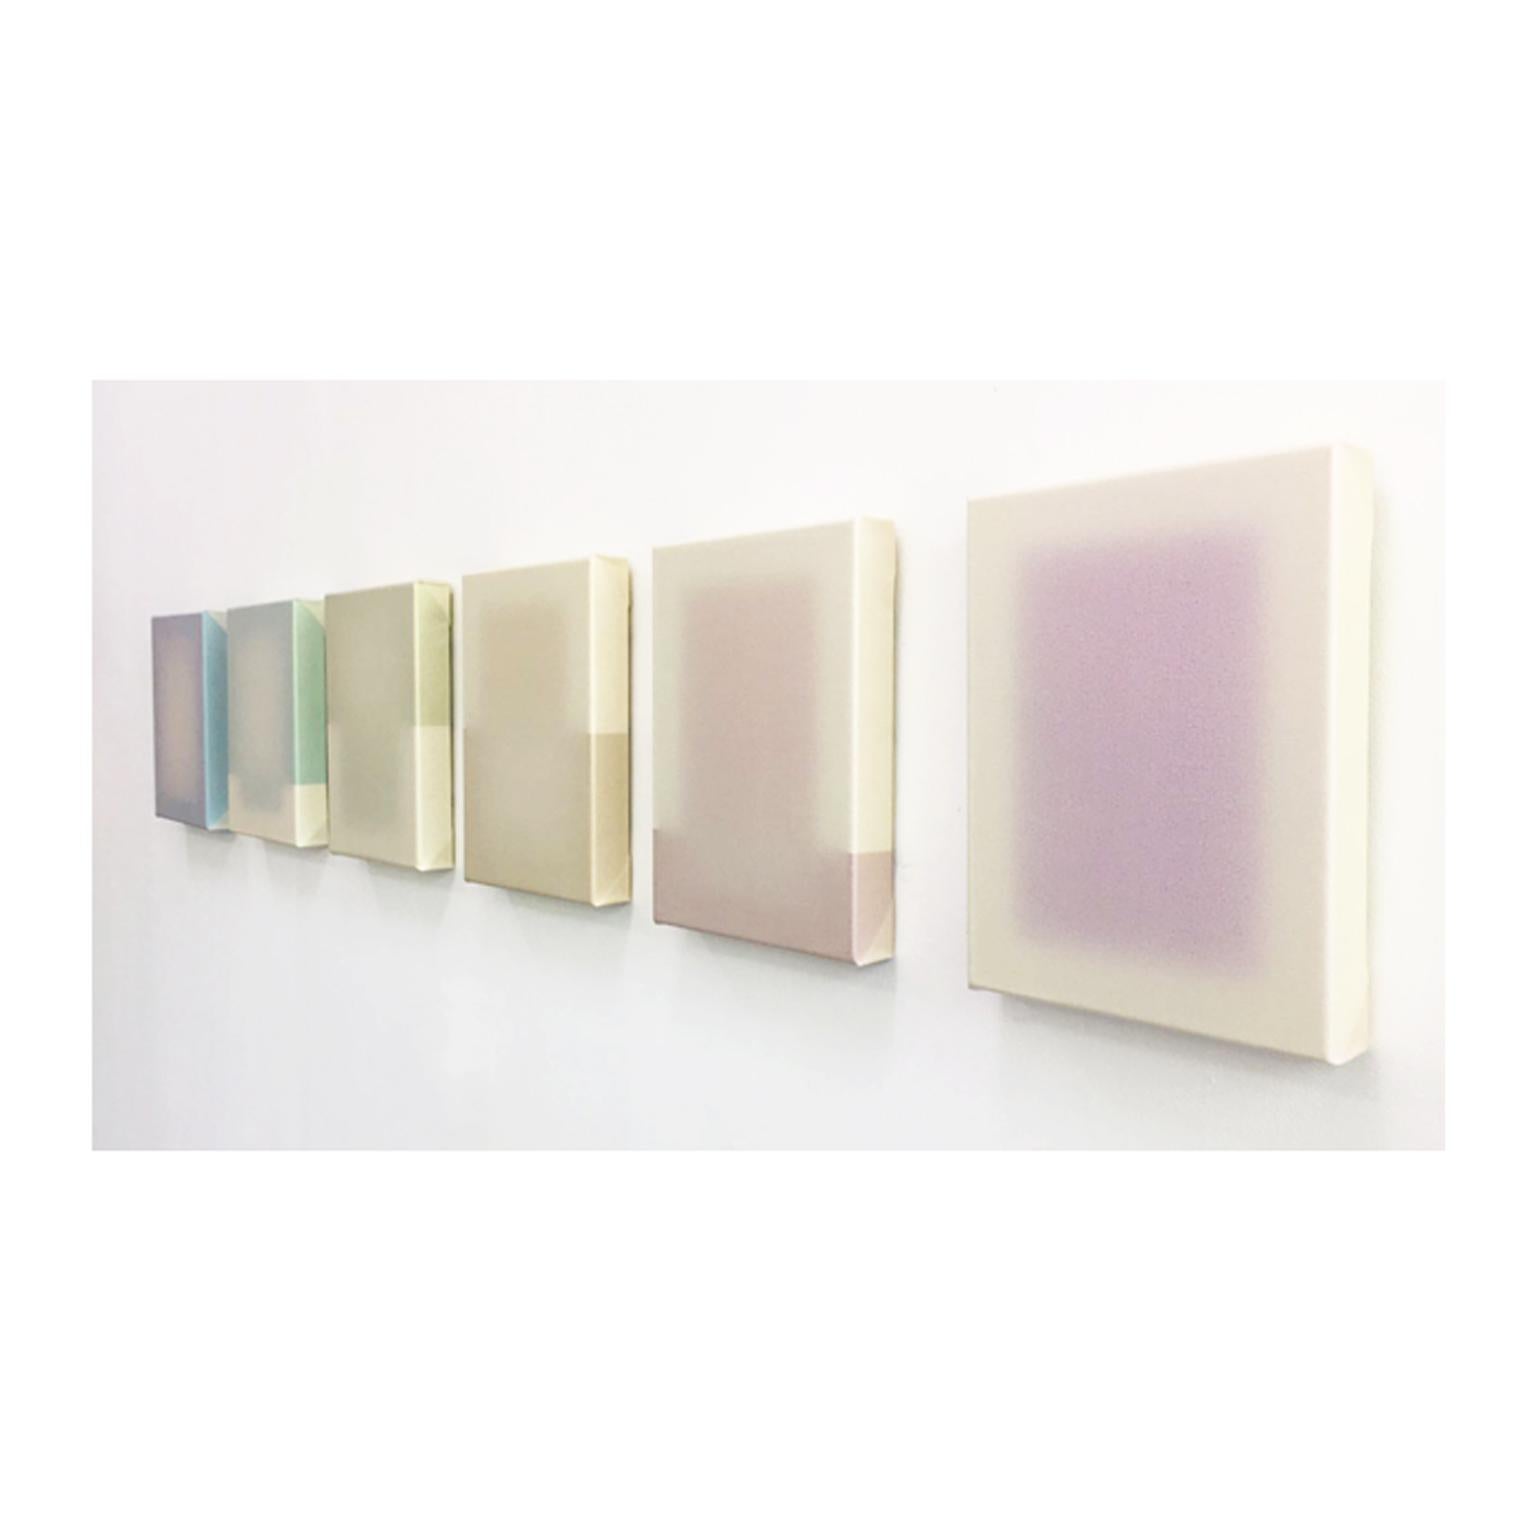 Shift (inversion)
Paintings from the shift series are pure panels of paint stretched over a supporting framework. Each panel is made by building up layers of paint onto a silicone mould taken from a traditional artist’s canvas. Each painting